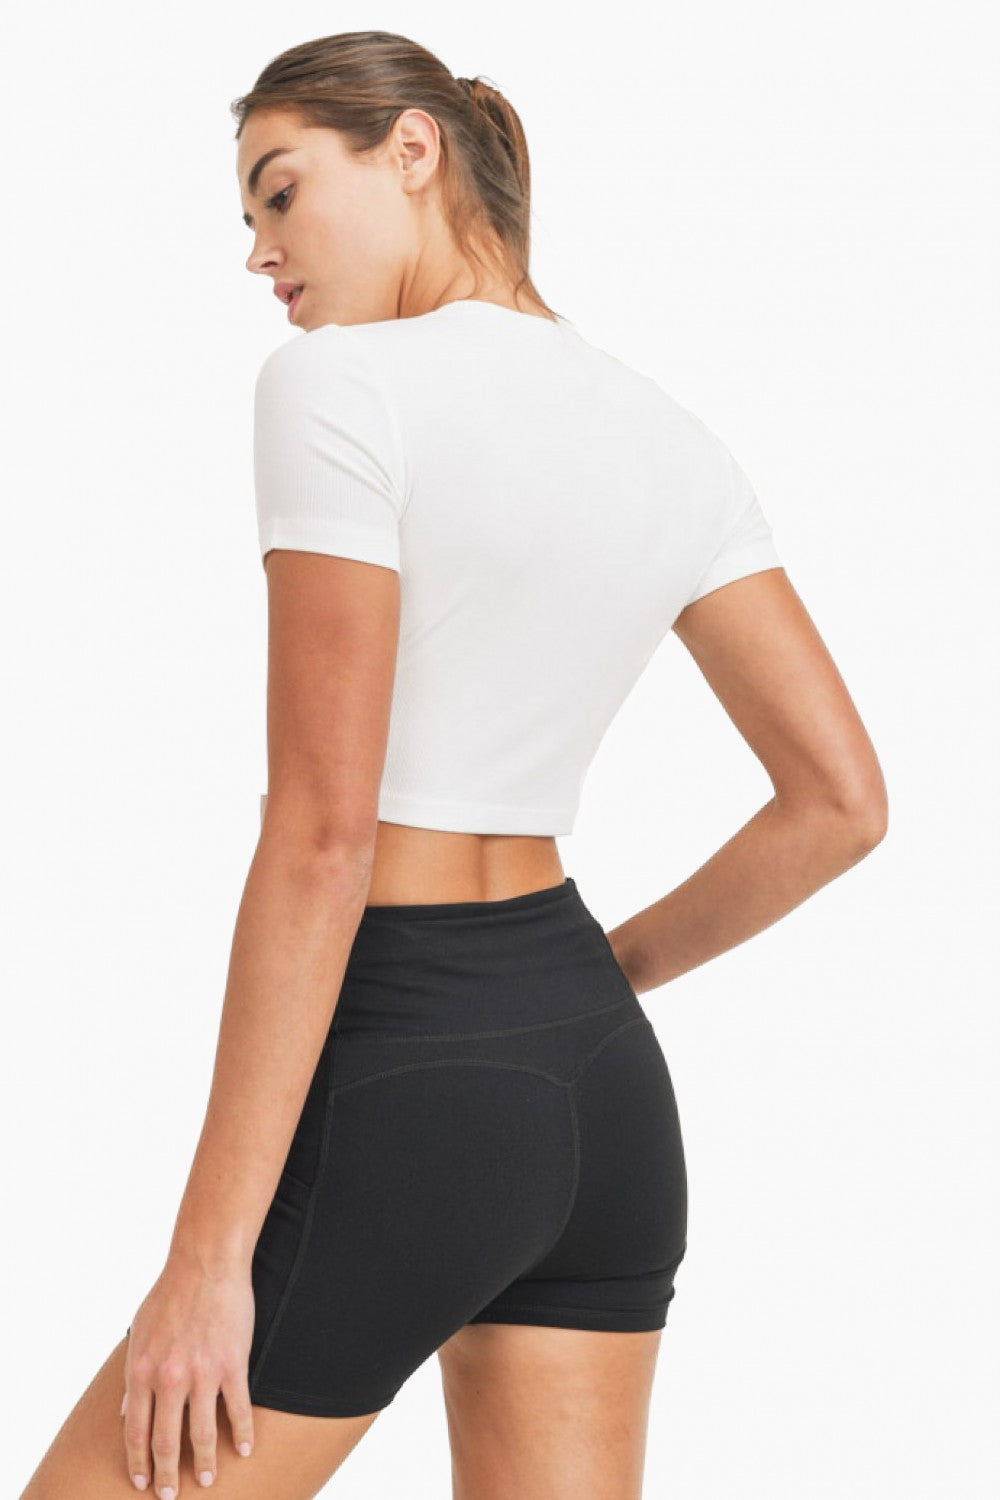 Whether as a workout top (worn over a sports bra and a pair of leggings) or as a cute top (matched with a denim item), this cropped tee is as versatile as it is comfortable. It has short sleeves, a rounded neckline, and a form-fitting silhouette.